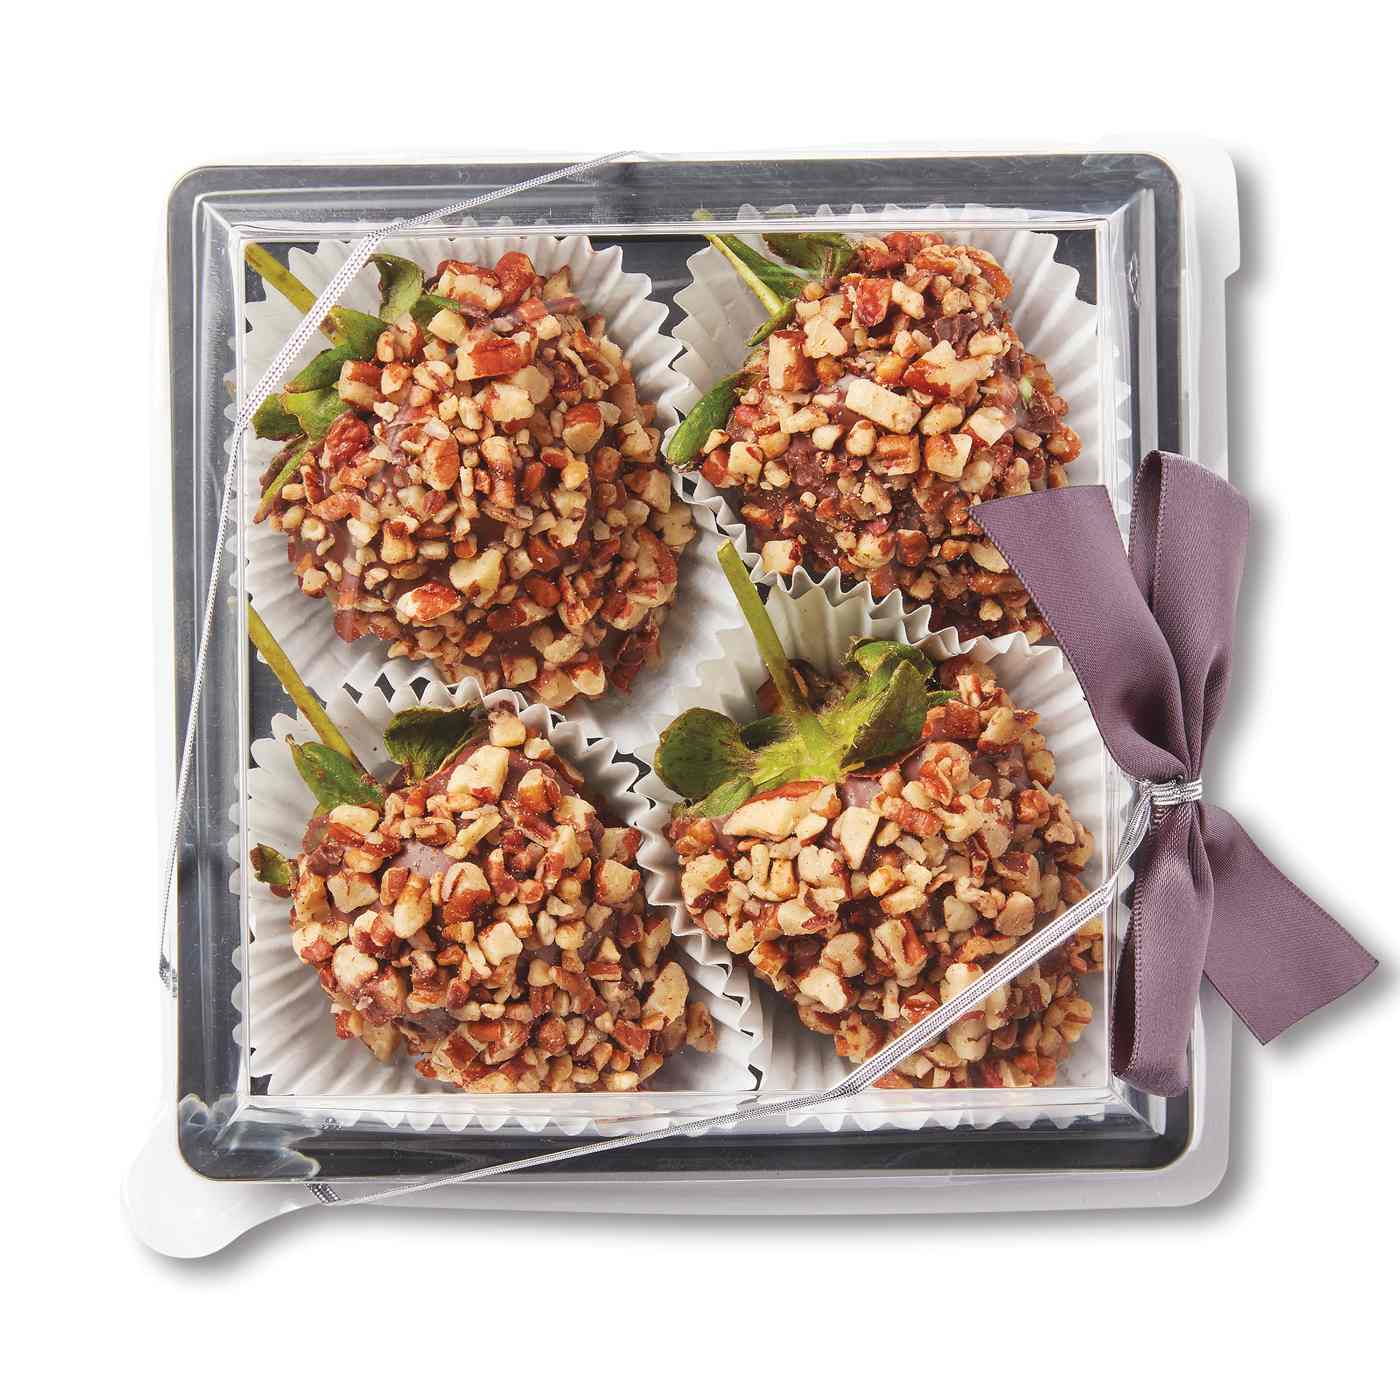 H-E-B Bakery Gourmet Chocolate-Dipped Strawberries - Pecans; image 2 of 2